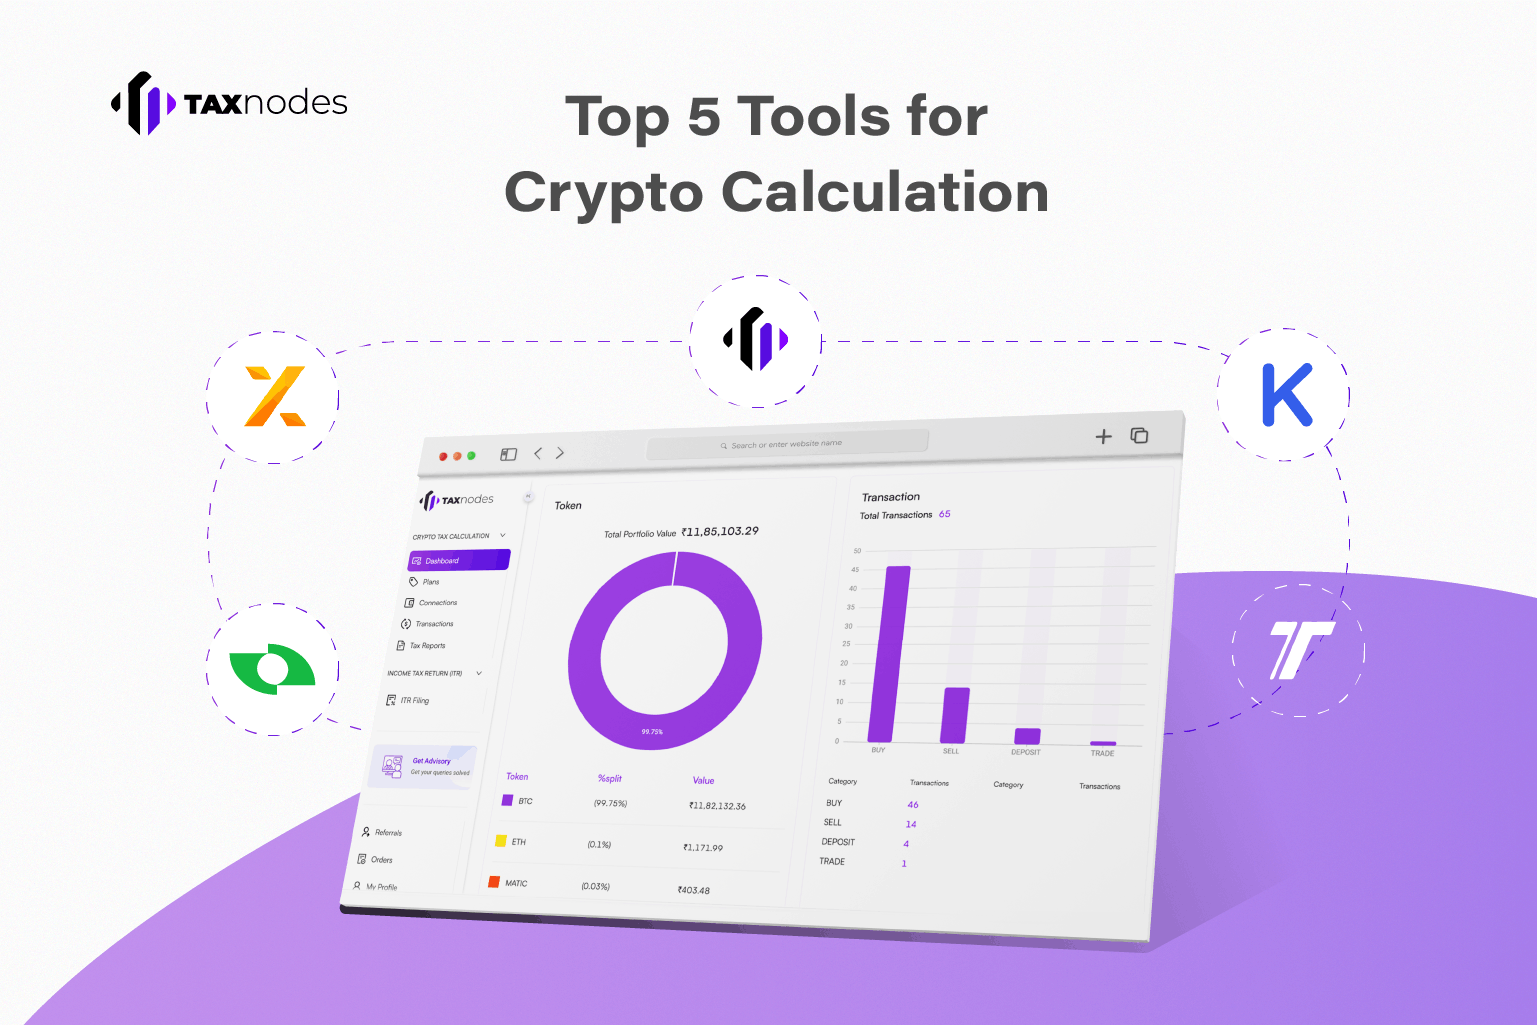 Top 5 tools for crypto calculation